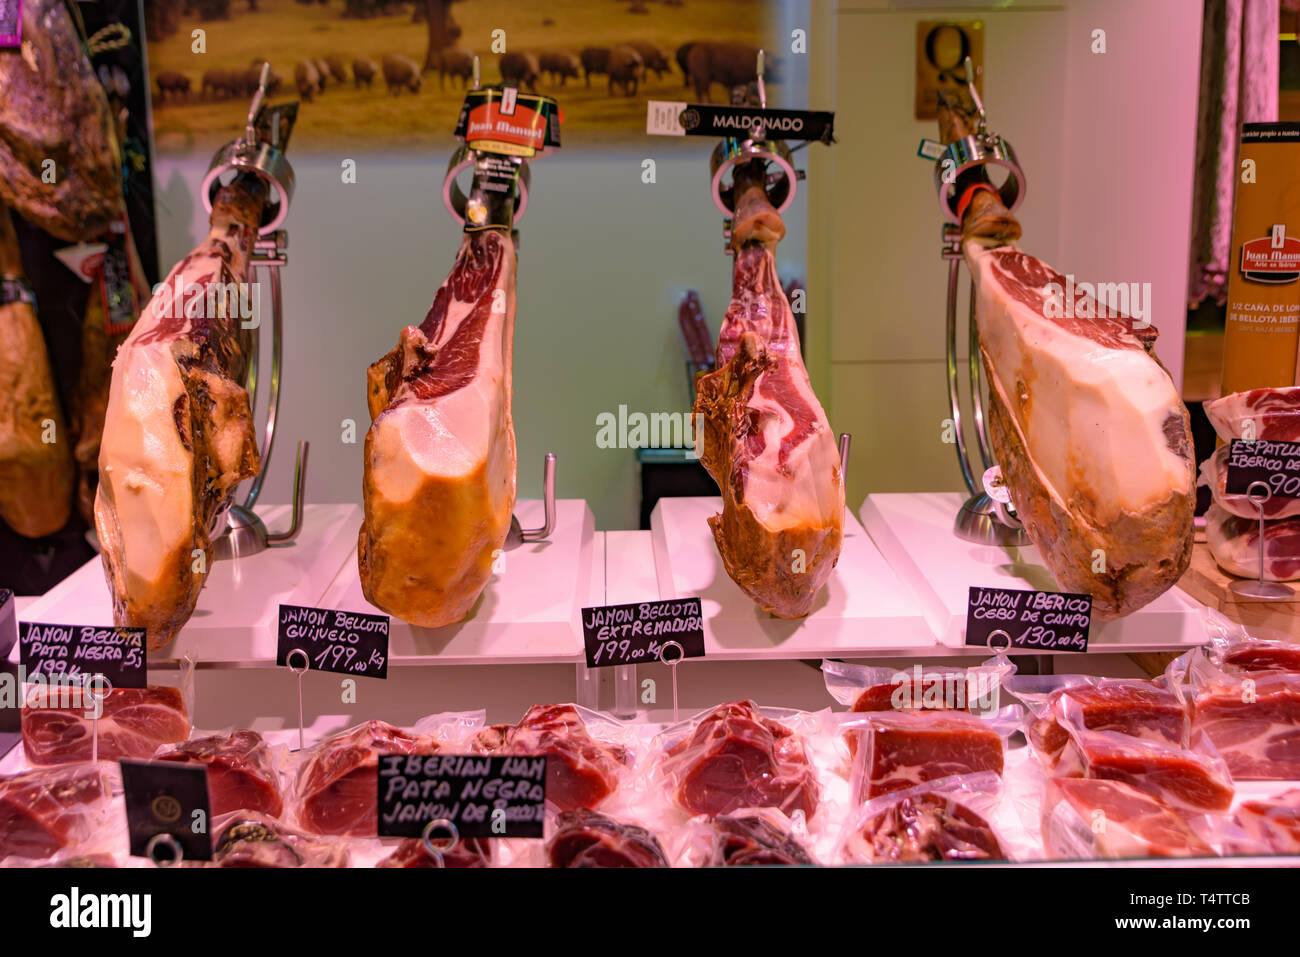 The stalls selling Jamón Serrano, the dry-cured Spanish ham made with Iberian pigs, in Barcelona, Spain Stock Photo